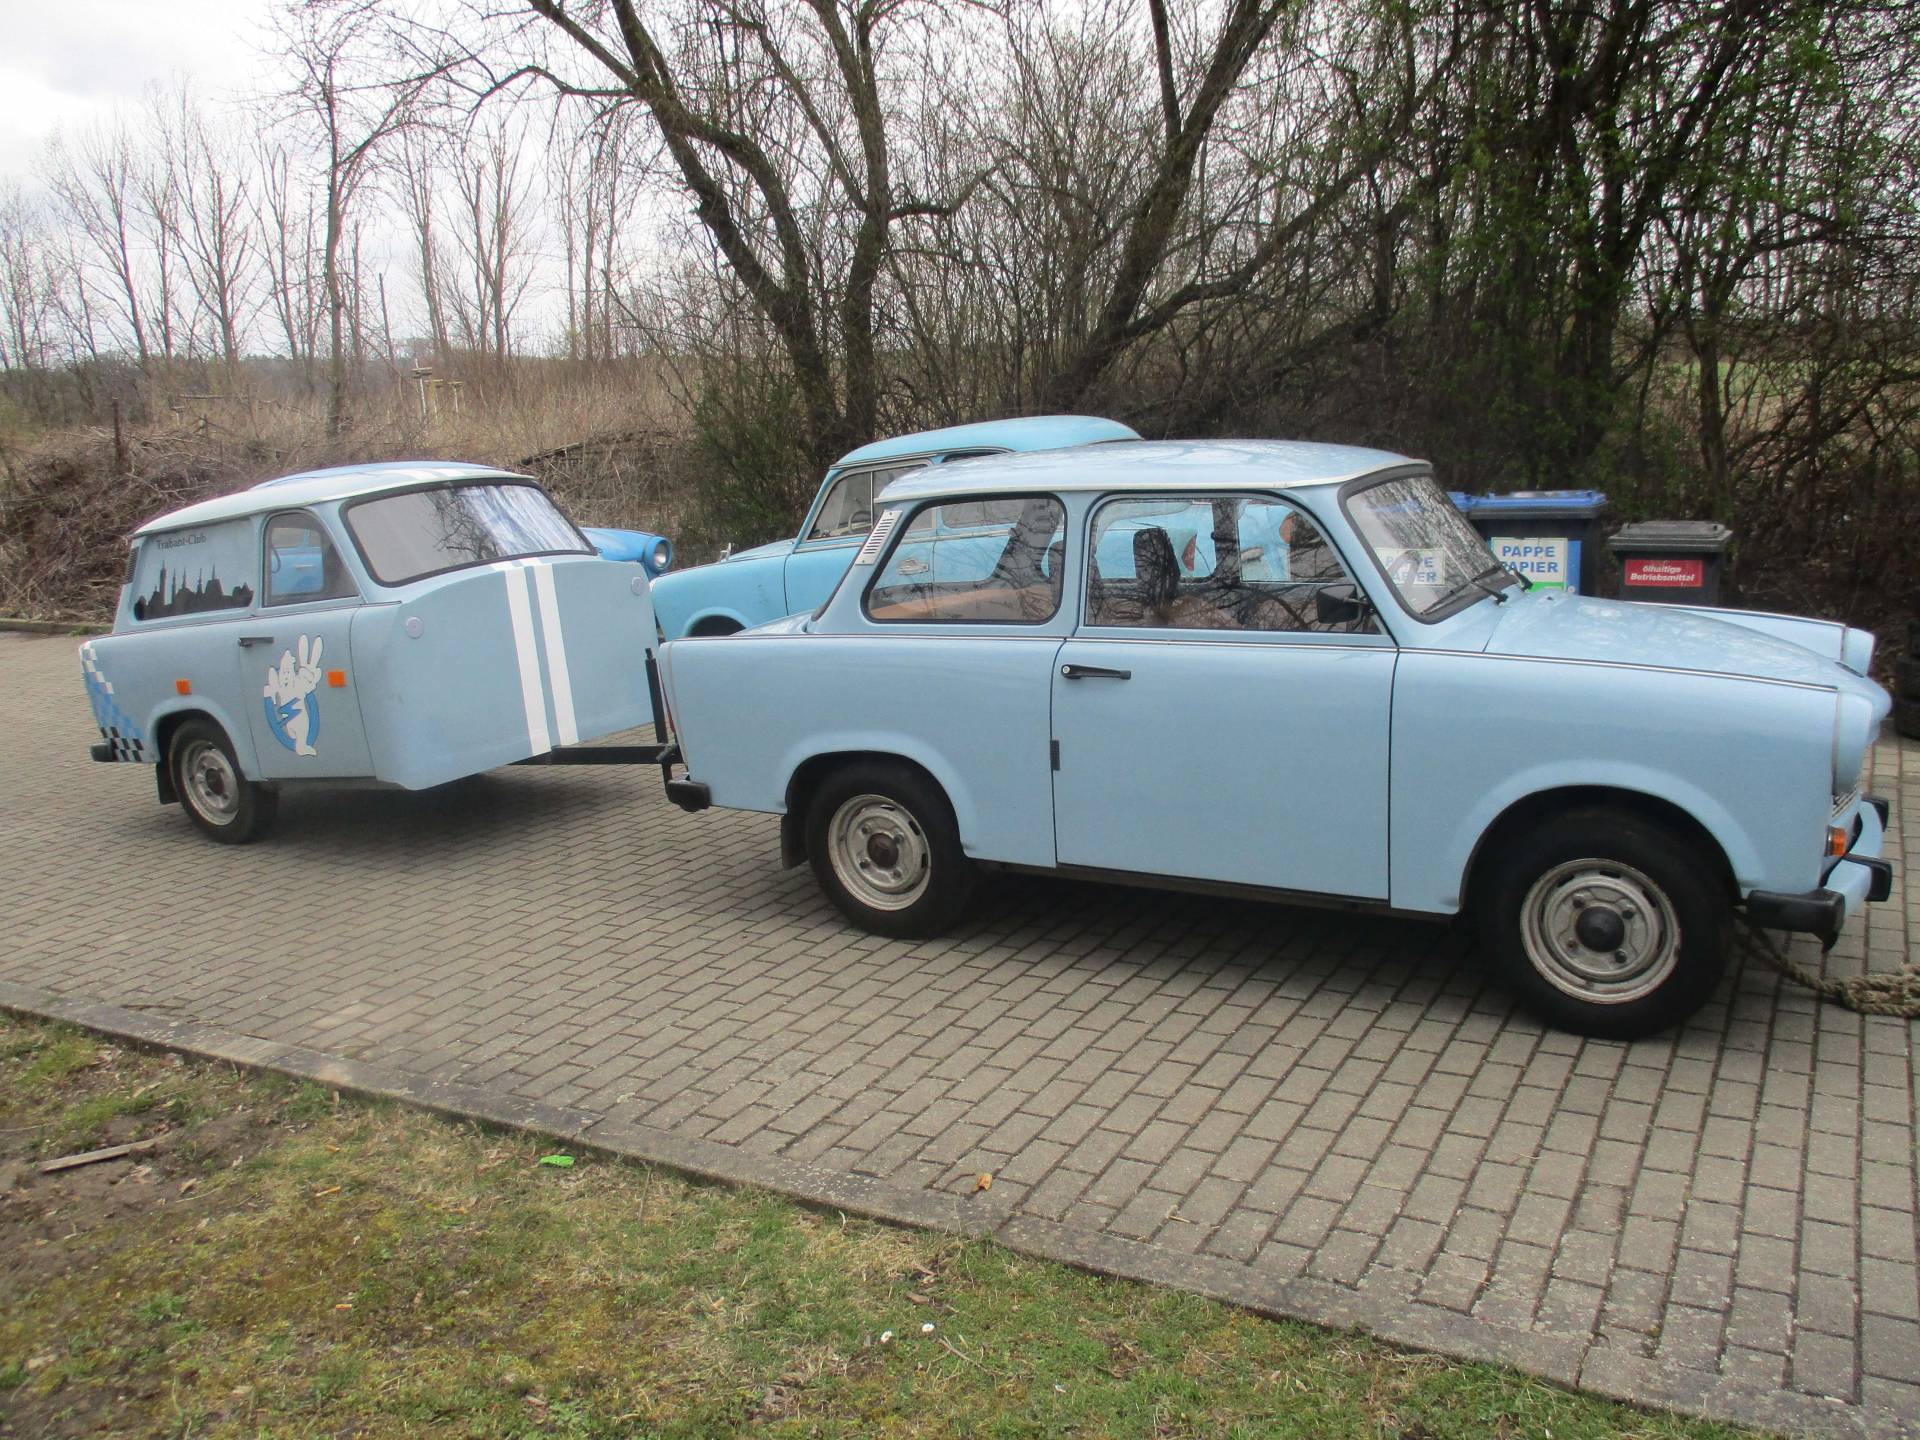 For Sale: Trabant 601 (1975) offered for €3,500